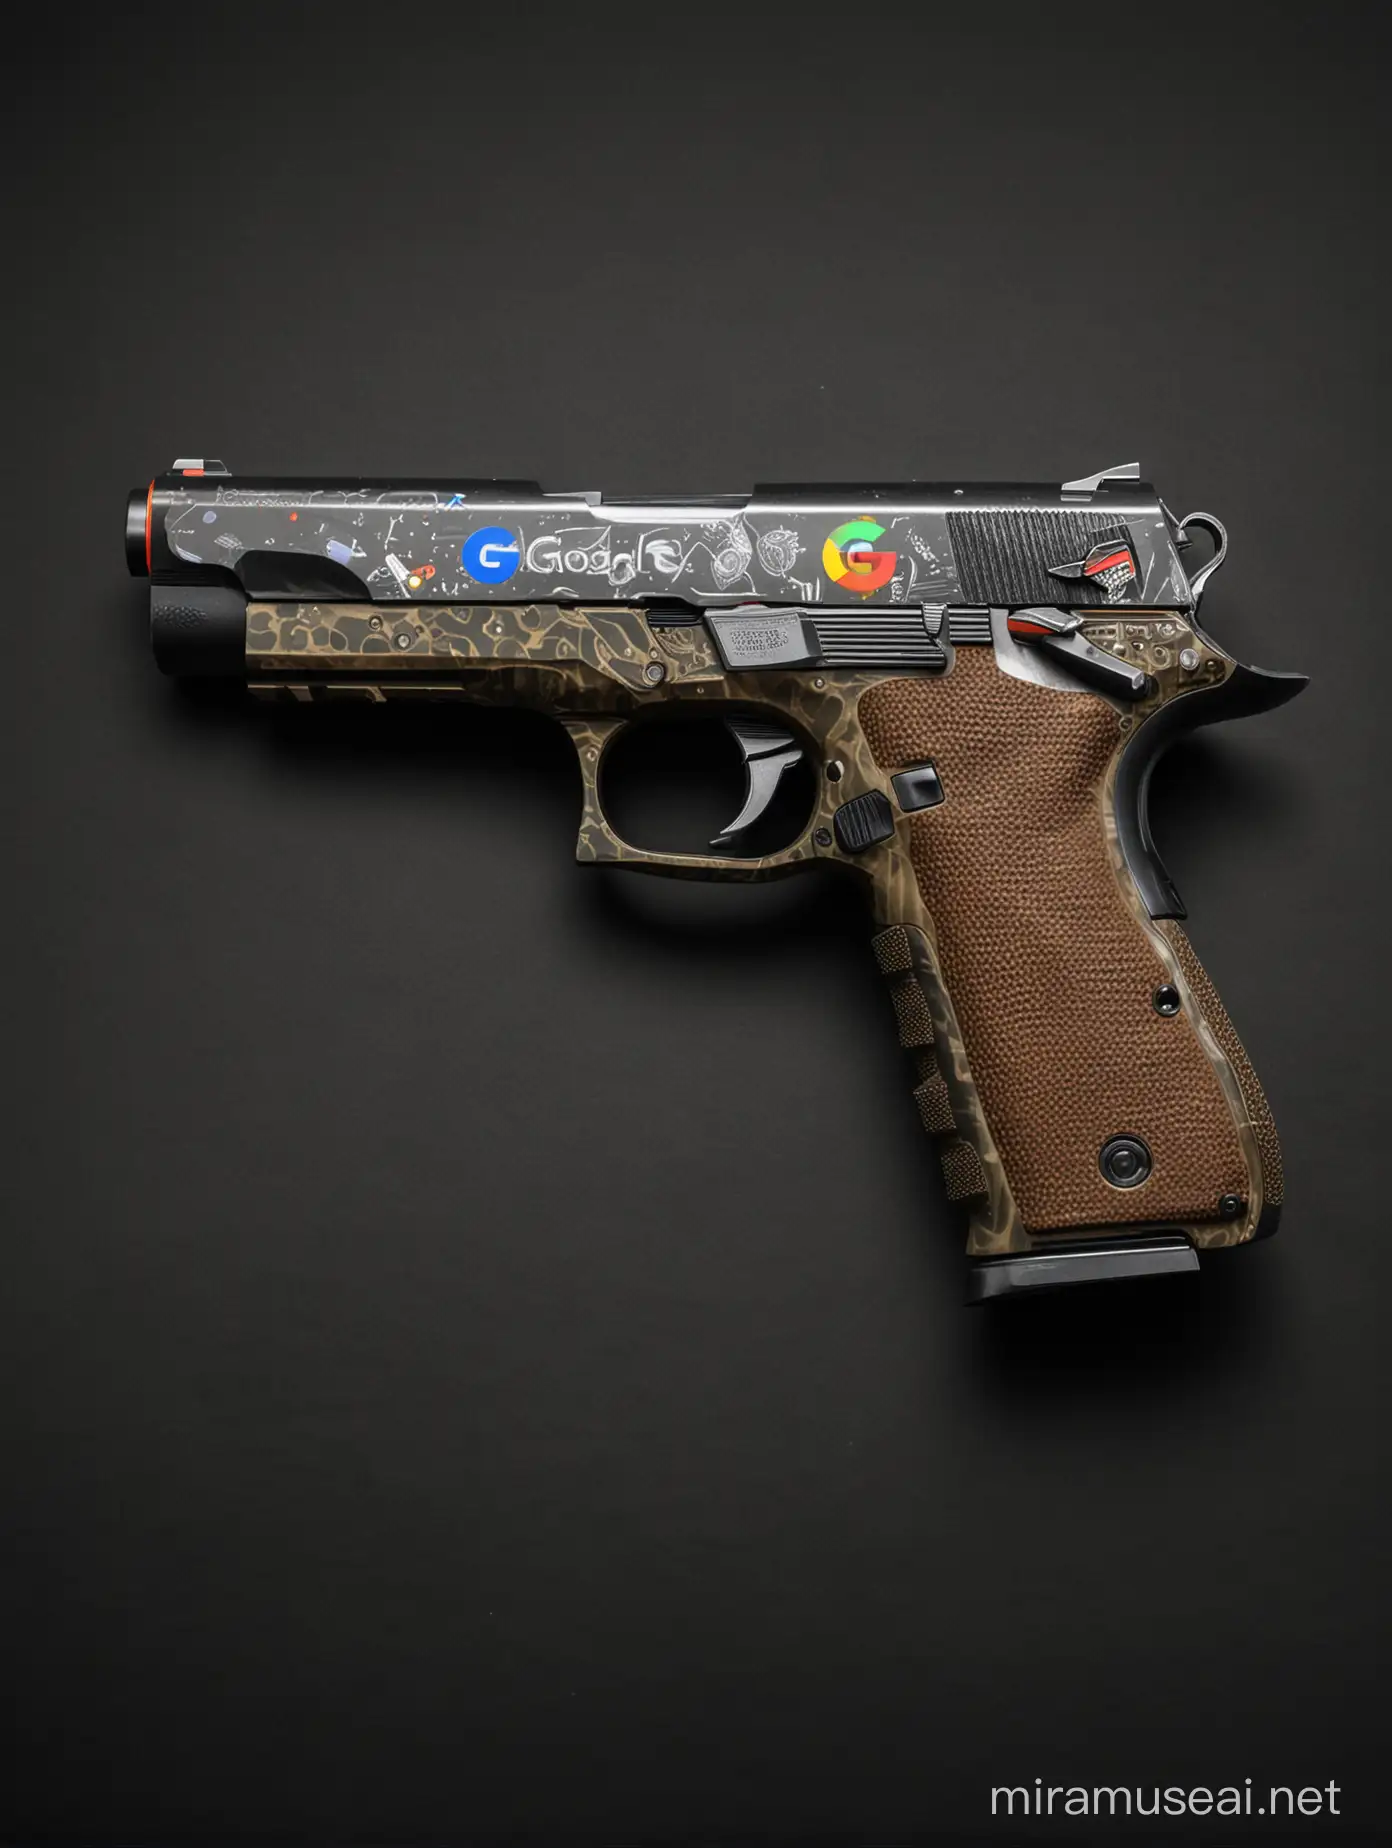 modern pistol firearm with google logo on the barrel, different colors, black background